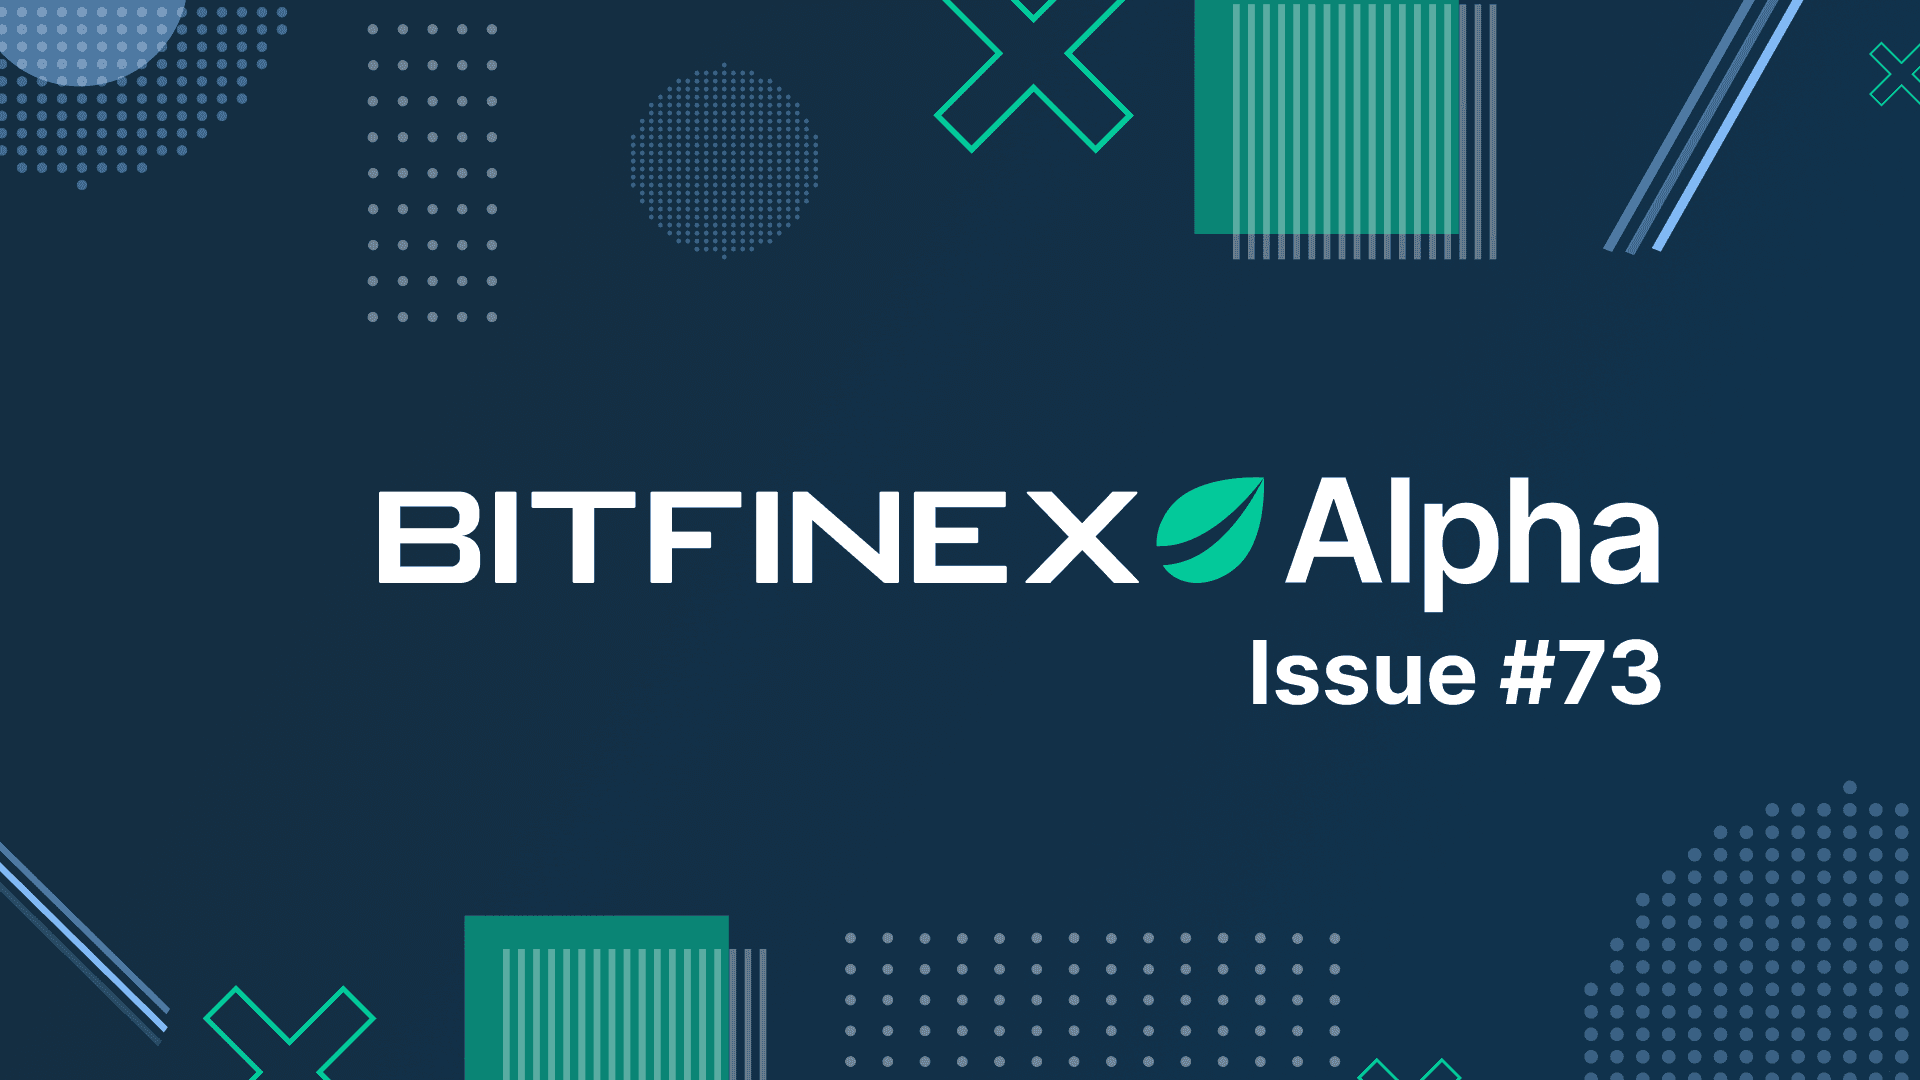 Bitfinex Alpha 73 | Markets remain stable as selling peaks